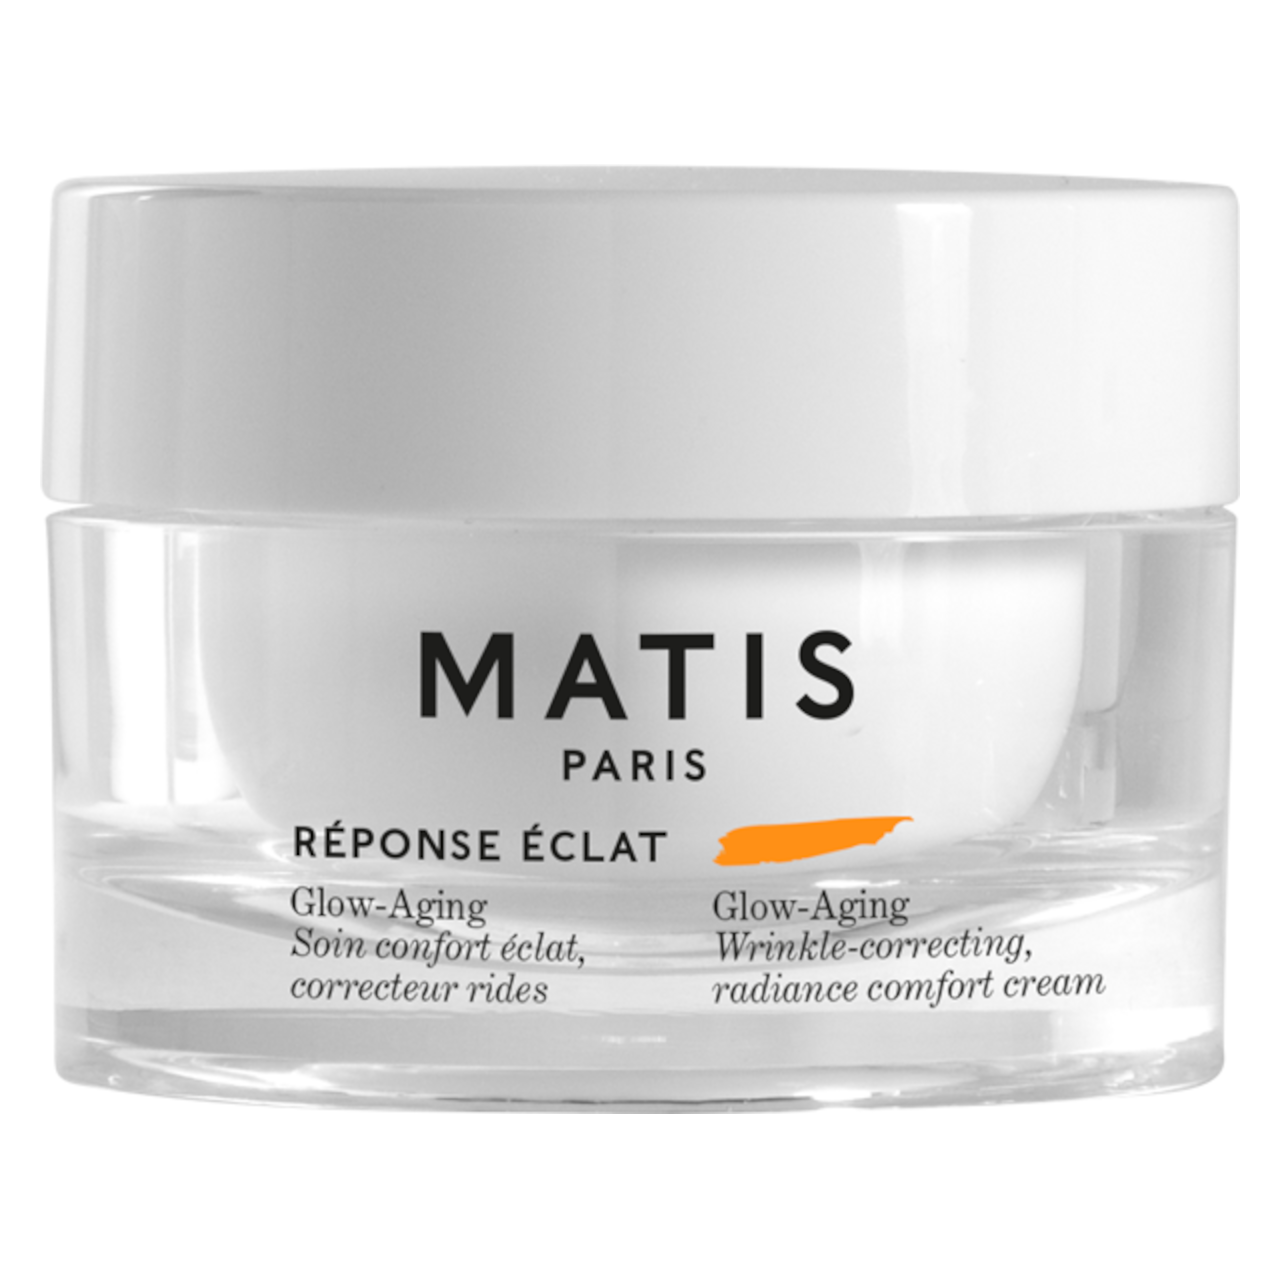 Matis Paris Reponse Eclat Glow-Aging Cream - 50 ml Questions & Answers